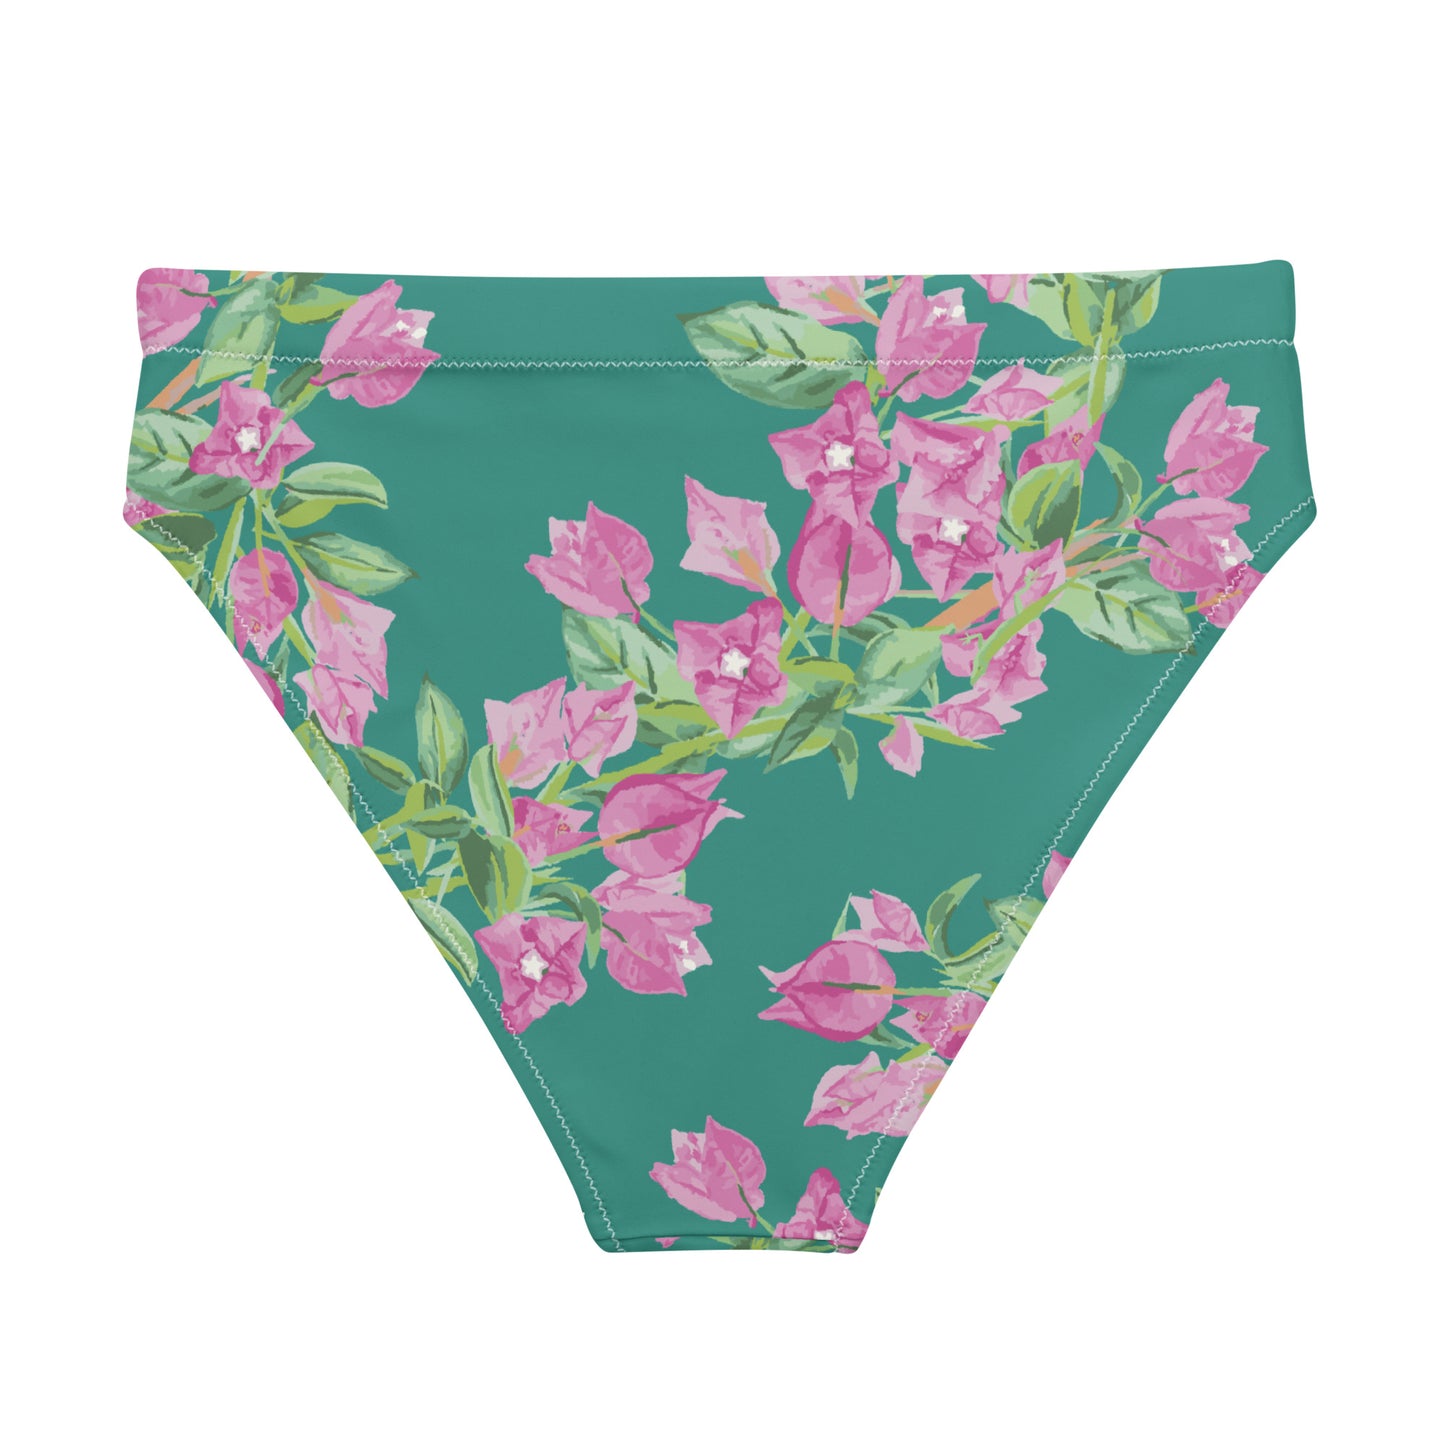 Bougainvillea Springs Teal and Pink Recycled High-waisted Bikini Bottoms